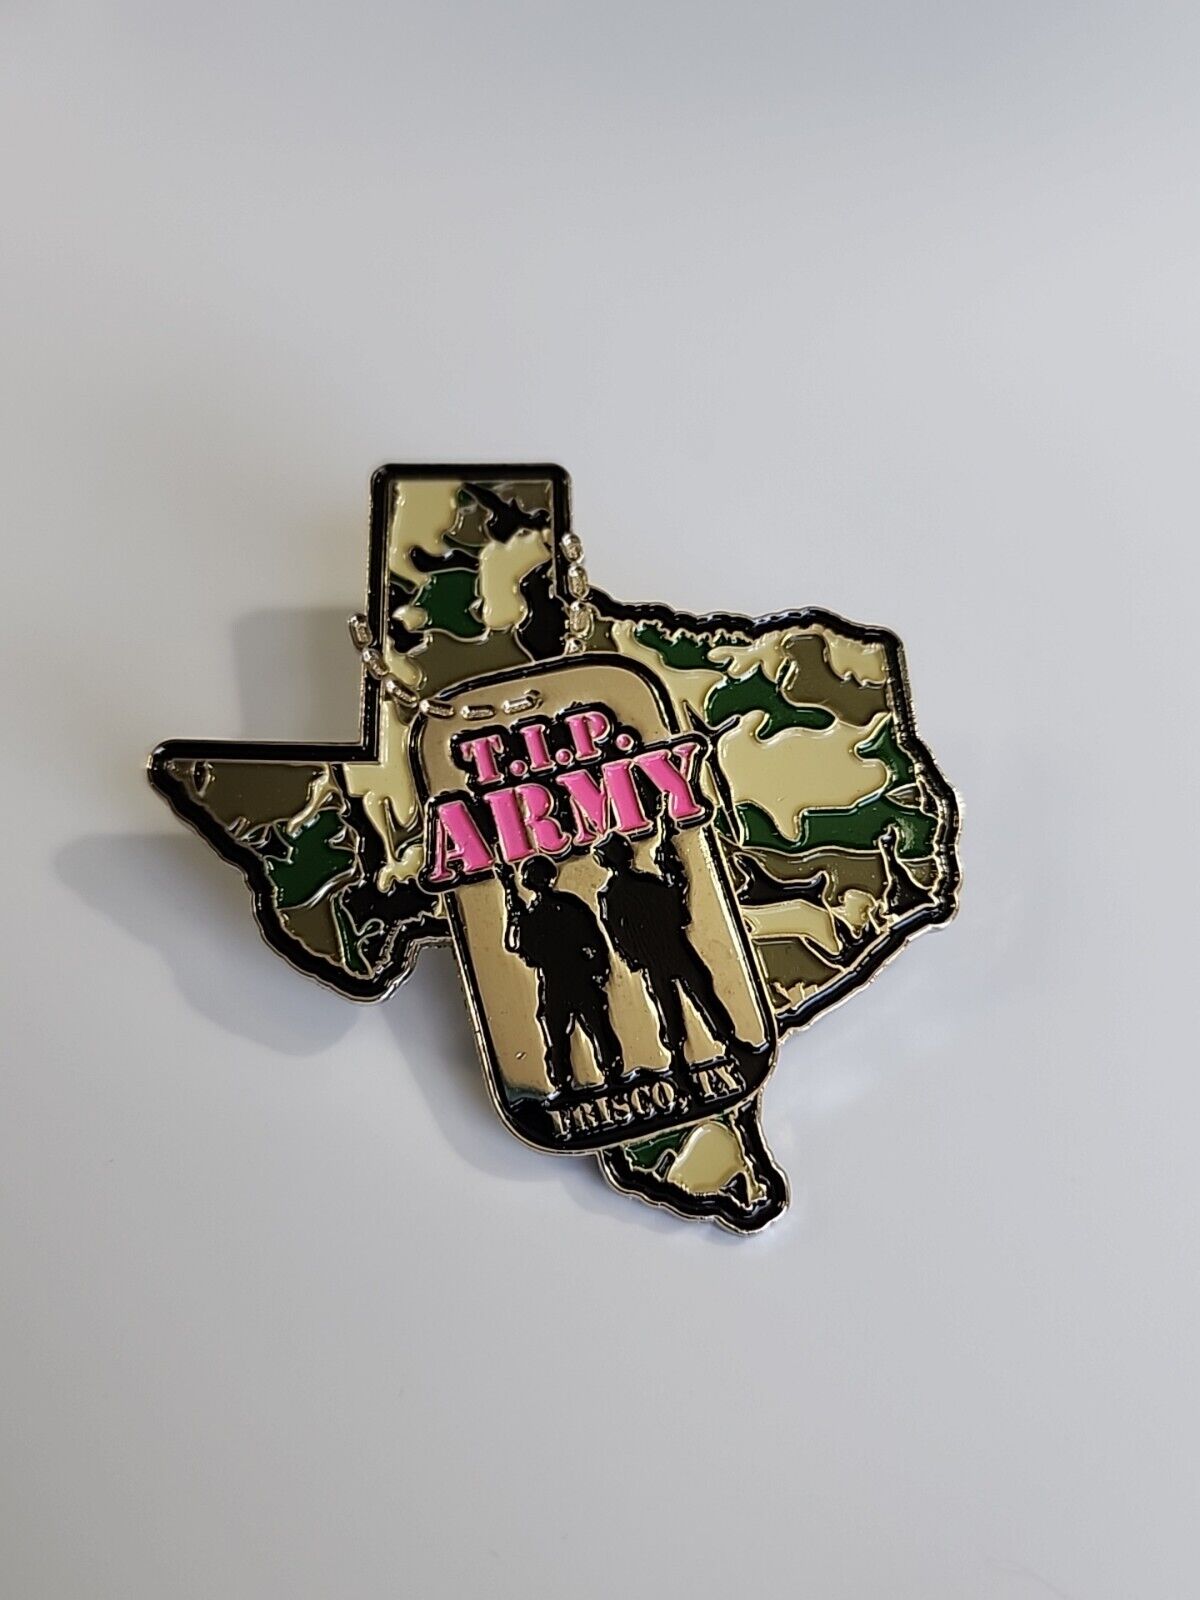 T. I. P. ARMY Frisco Texas Lapel Pin Large Size US Army Recruiting Station 